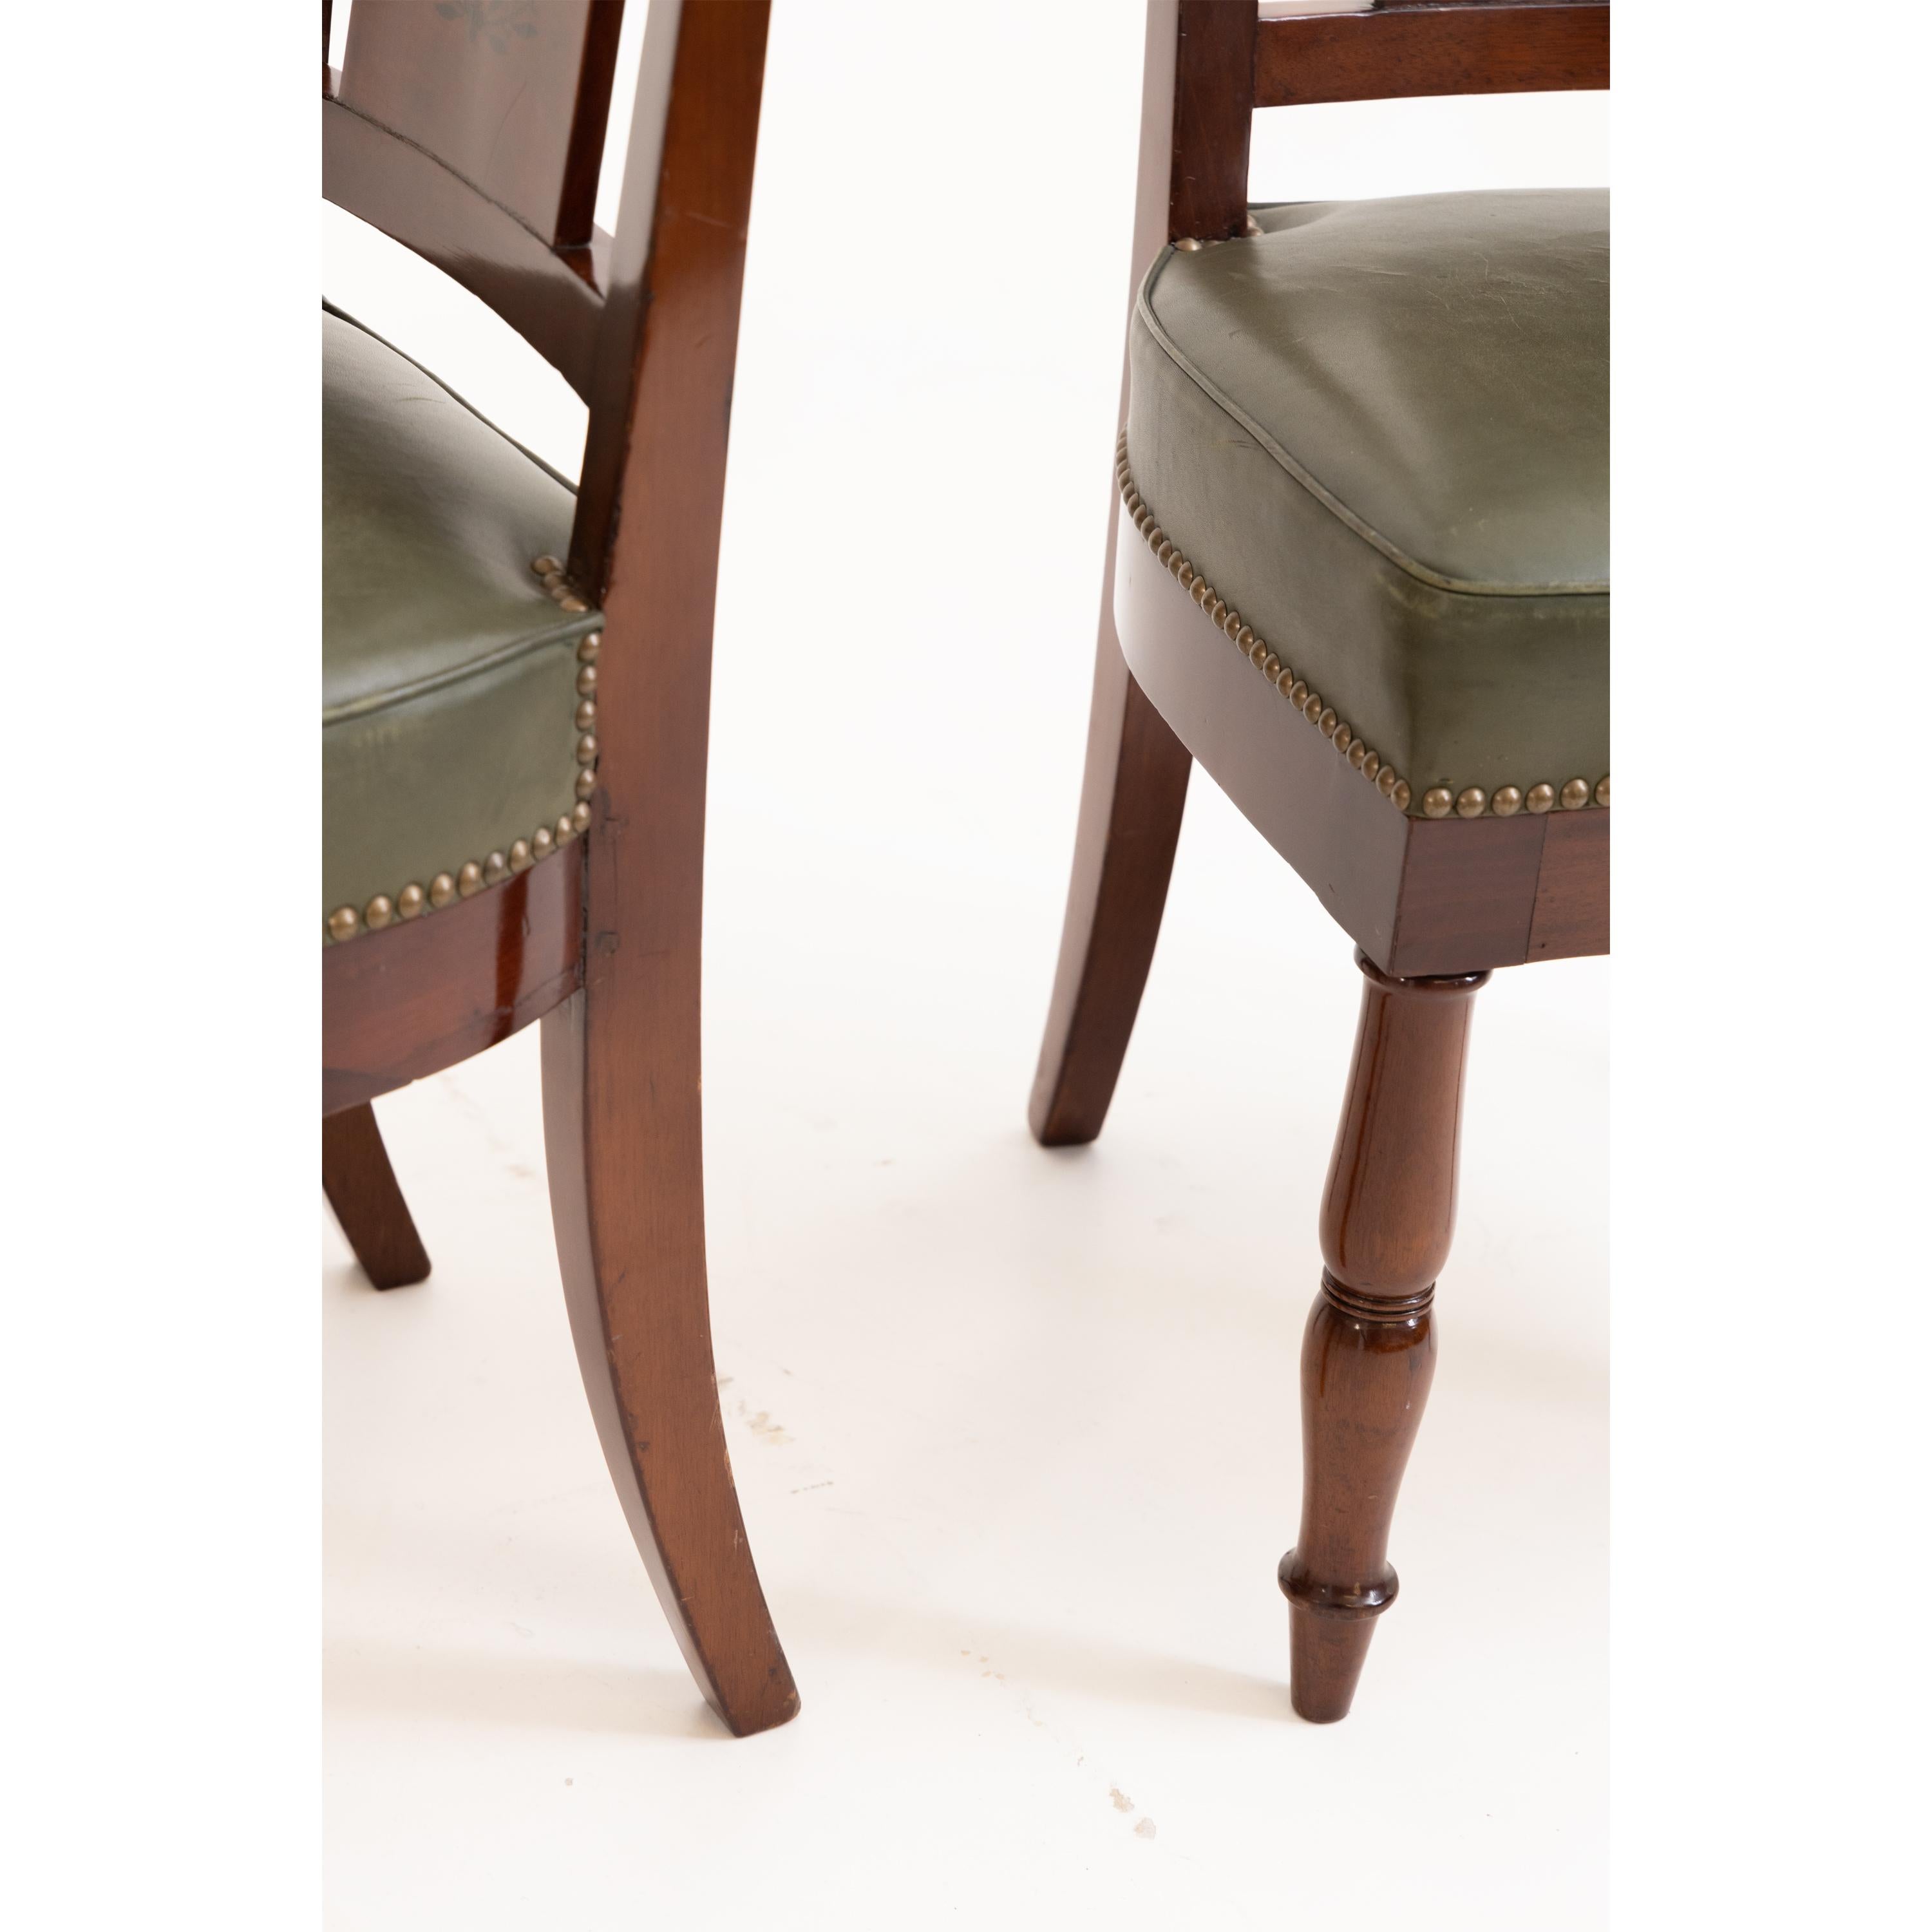 Pair of Mahogany Dining Room Chairs, Paris, circa 1810 In Good Condition For Sale In Greding, DE